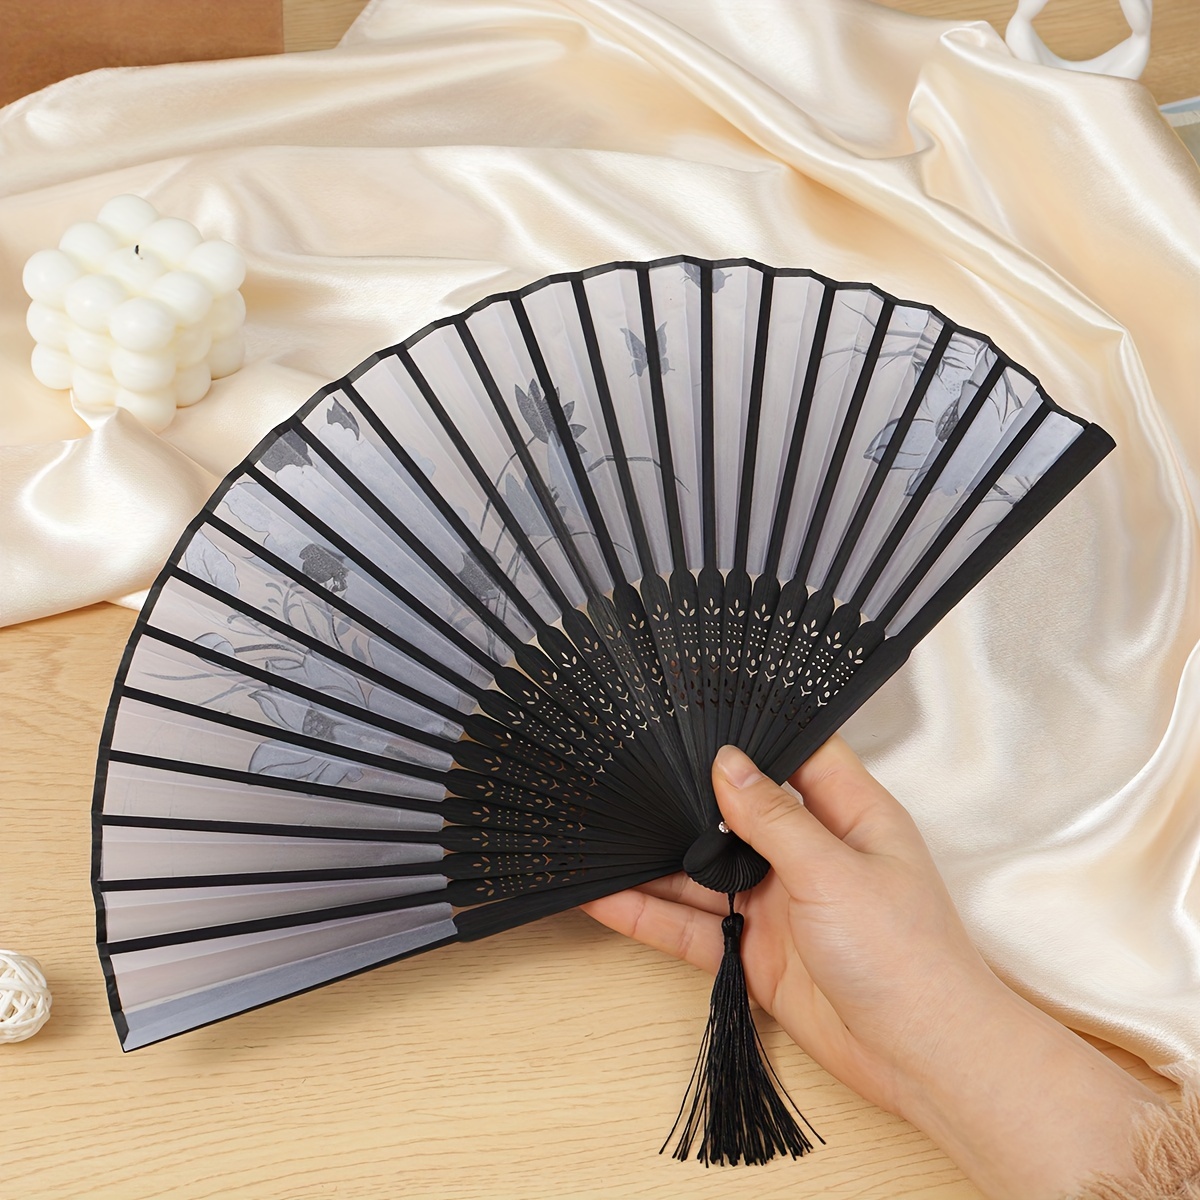 1pc paper fans hand fans for women foldable hand held fans for